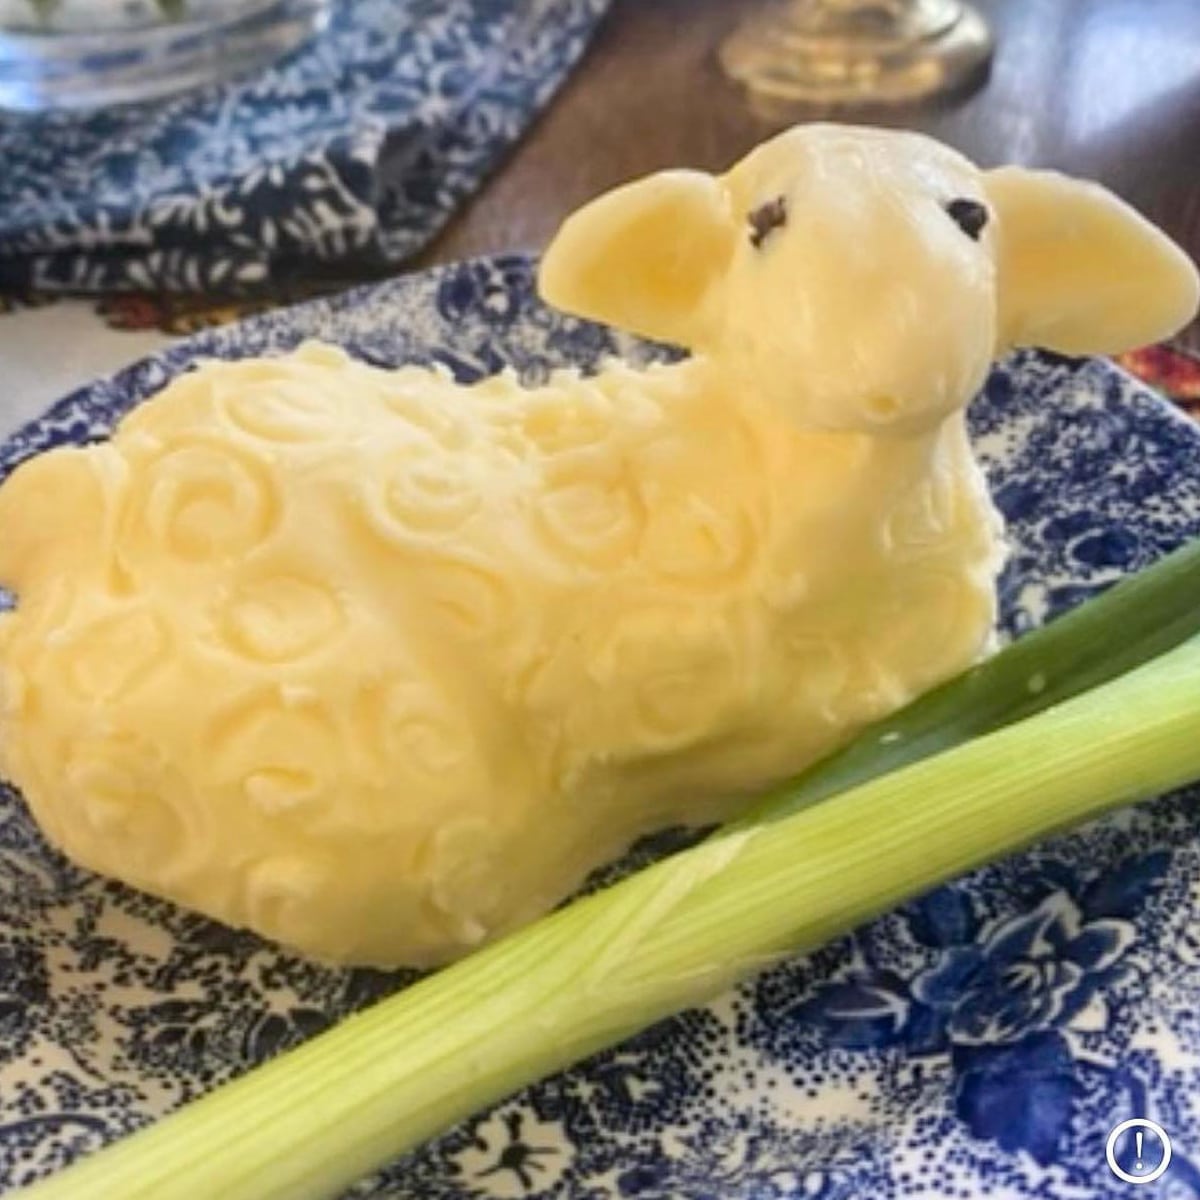 lamb carved out of butter on blue floral patterned material with slice of green onion in front